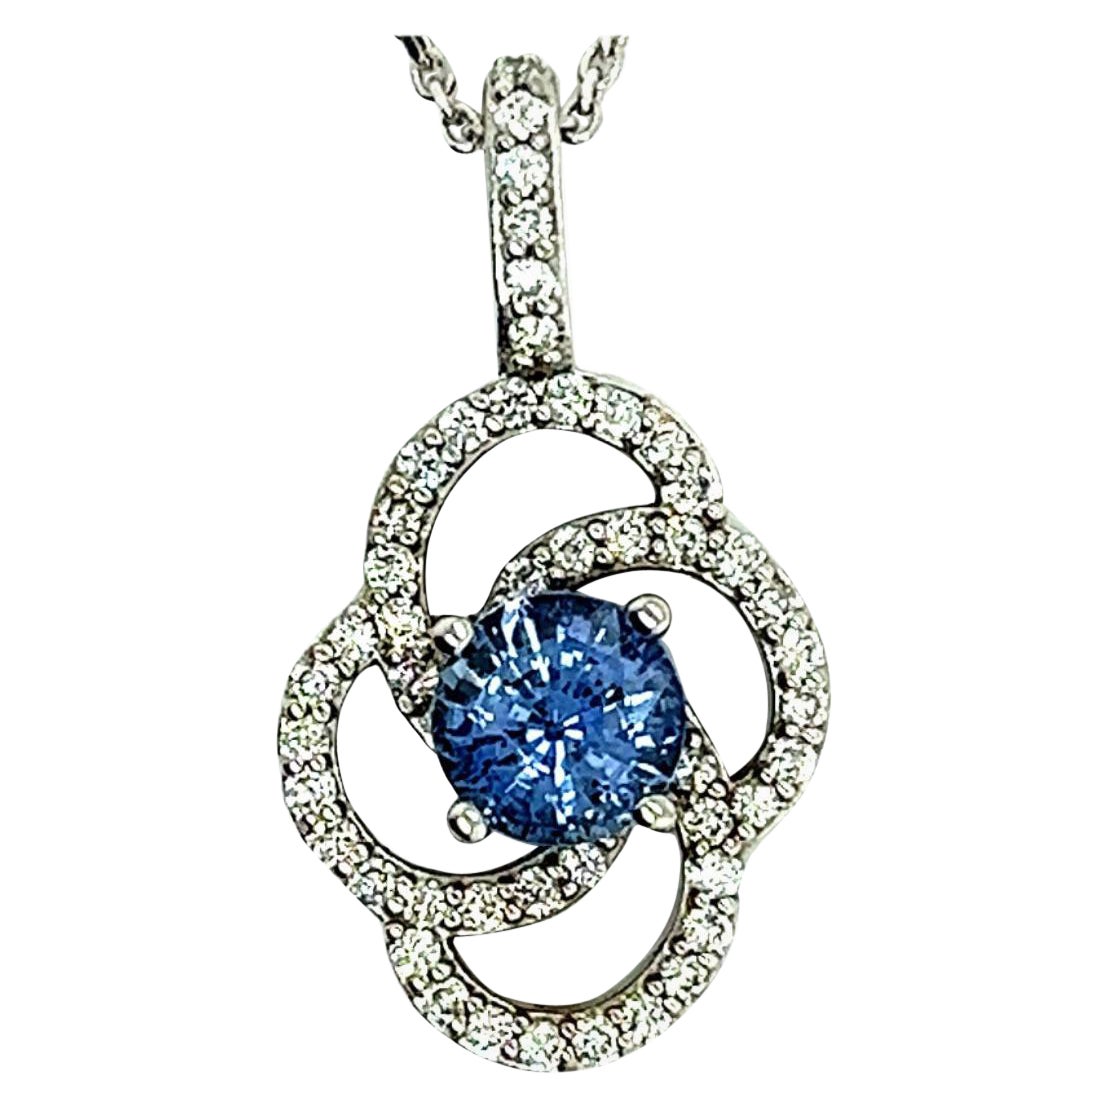 Natural Sapphire Diamond Pendant with Chain 14k W Gold 2.17 TCW Certified